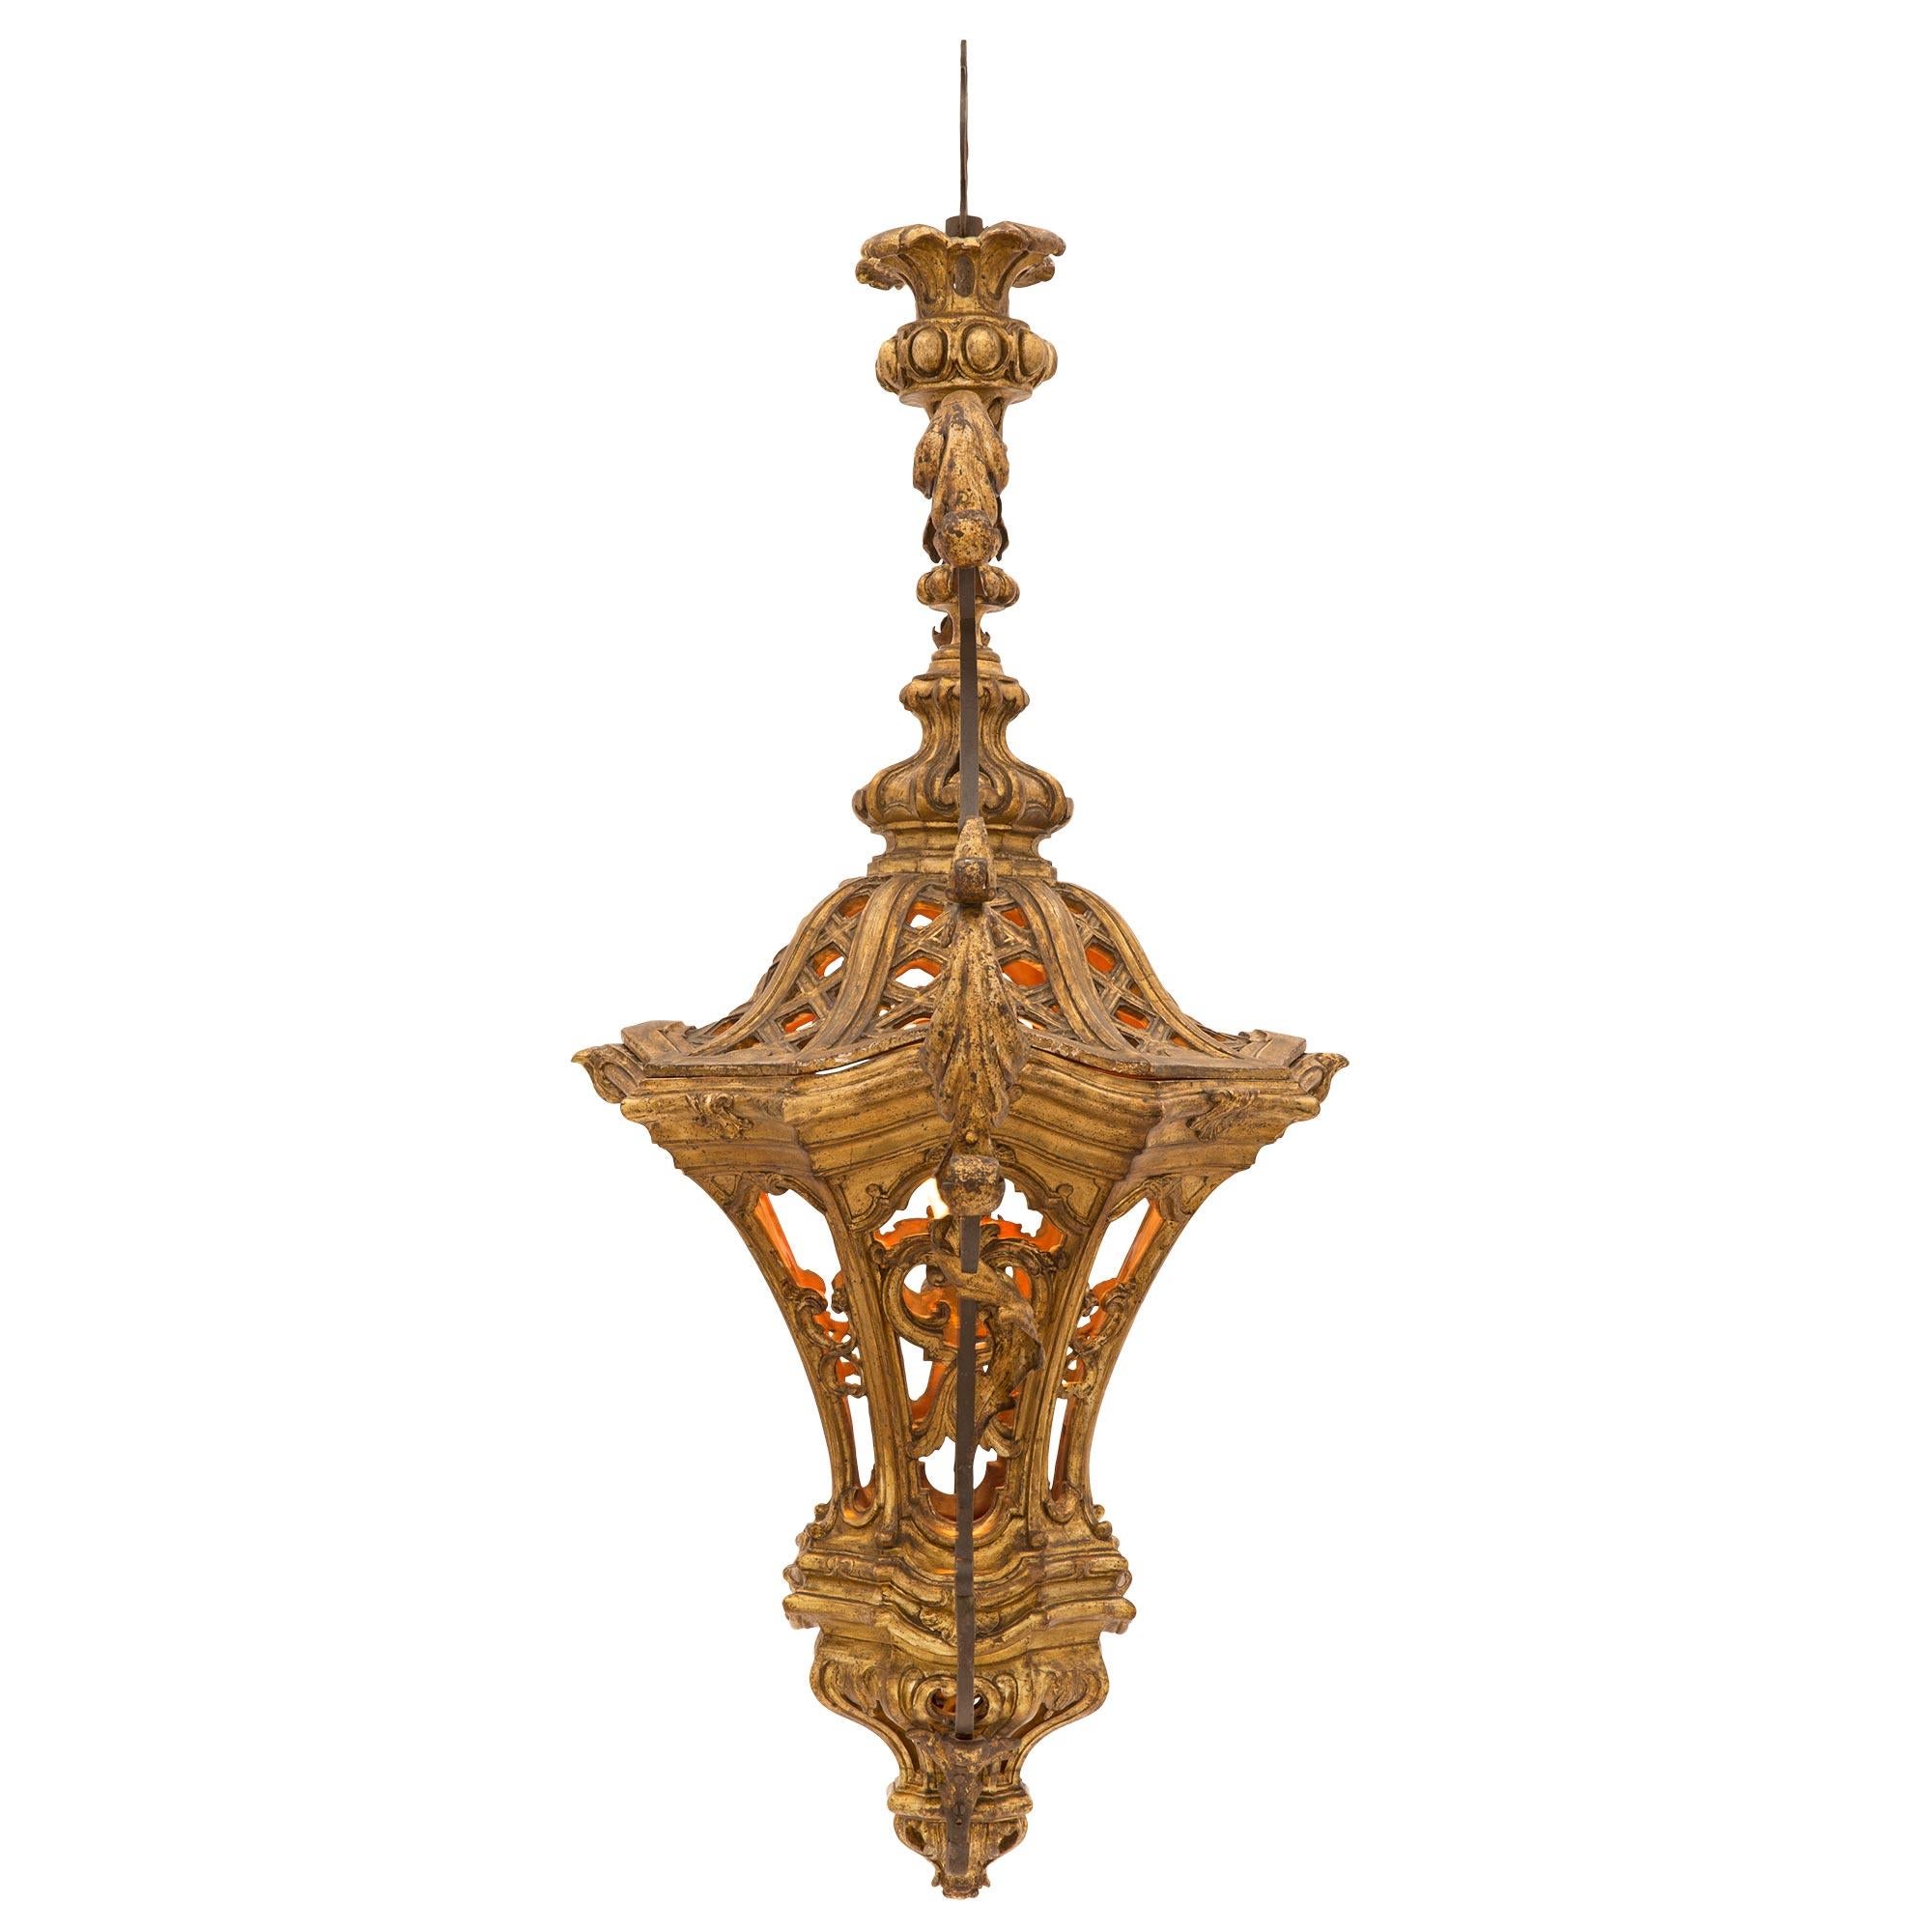 An exquisite and very unique Italian 18th century Venetian st. mecca, gilt metal, and wrought iron lantern. The lantern is centered by a charming richly carved floral finial below the impressive and most decorative pierced body with stunning